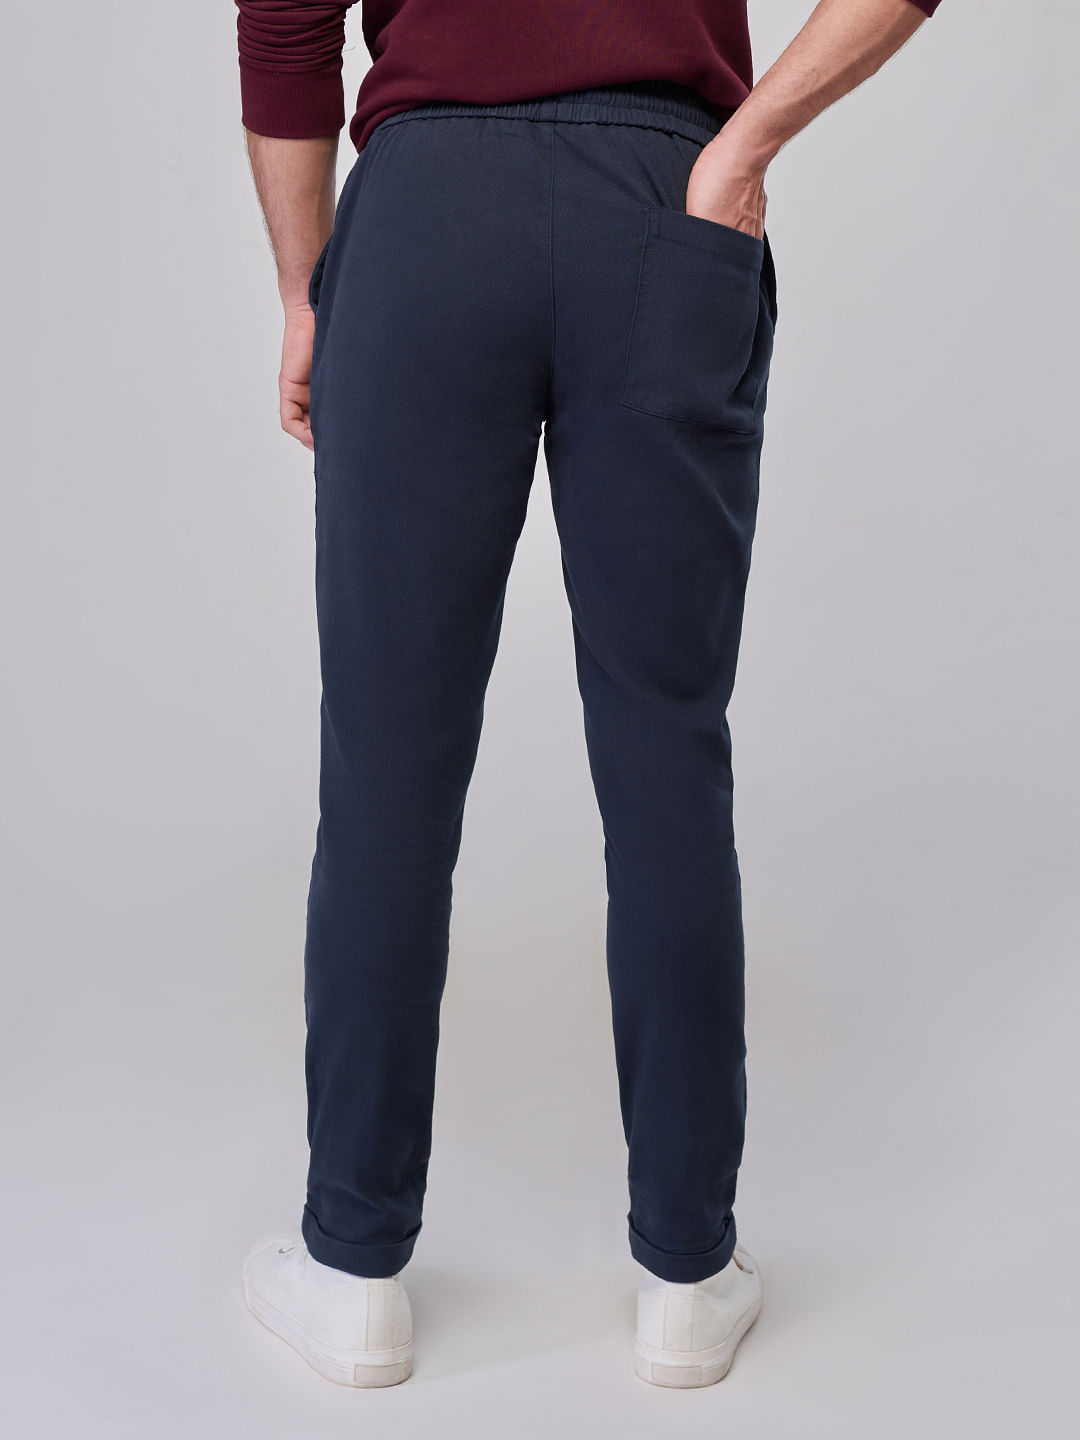 Buy Solids Navy Blue Cotton Stretch Structured Pants Online